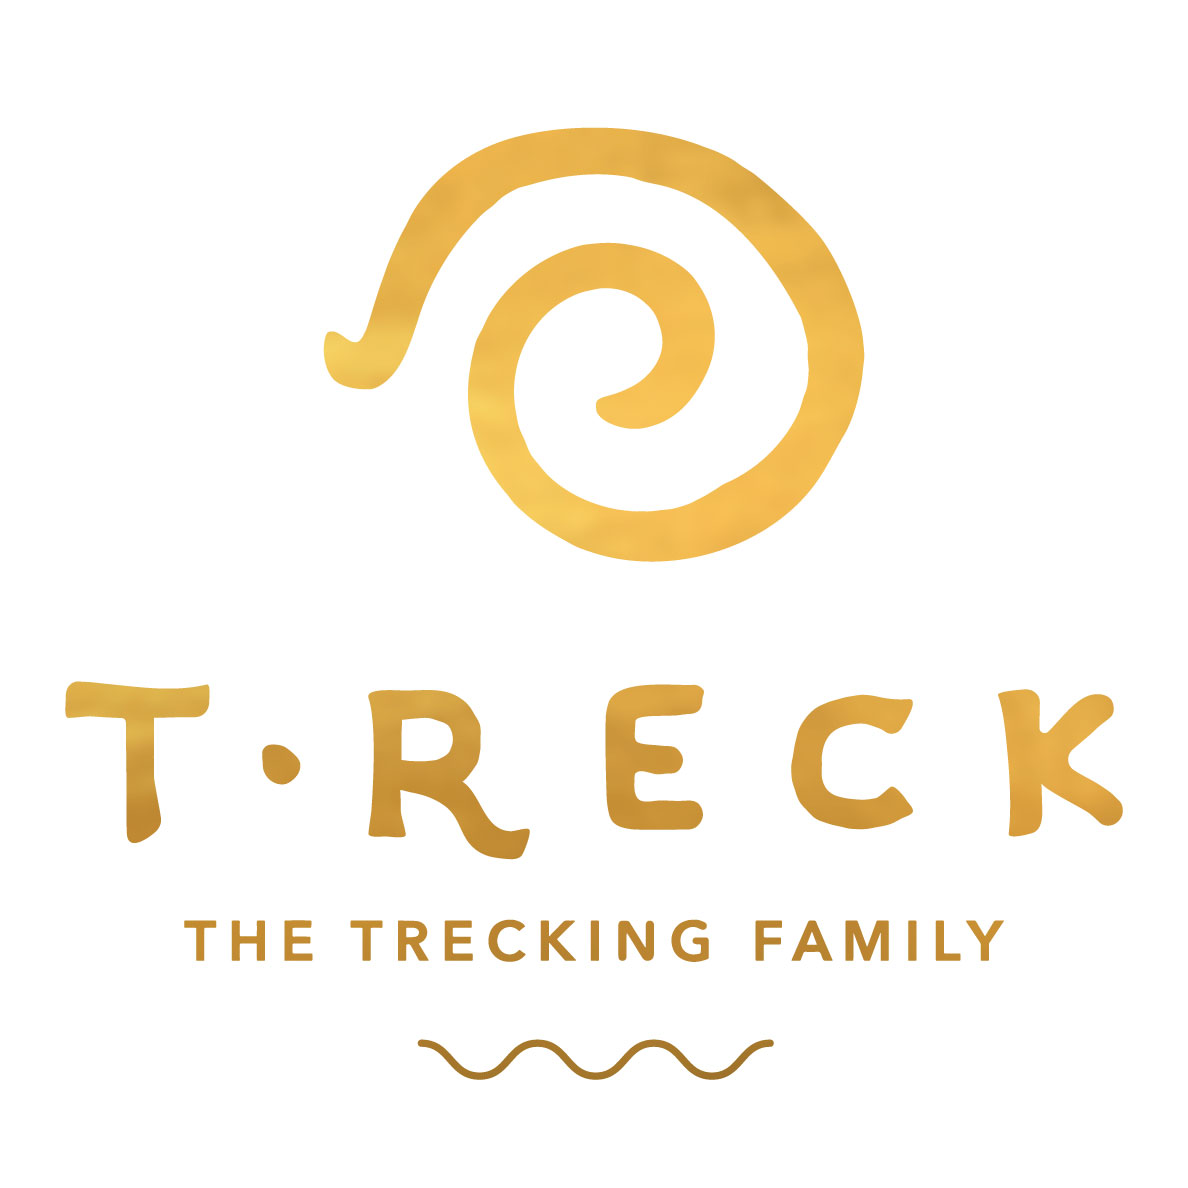 The Trecking Family